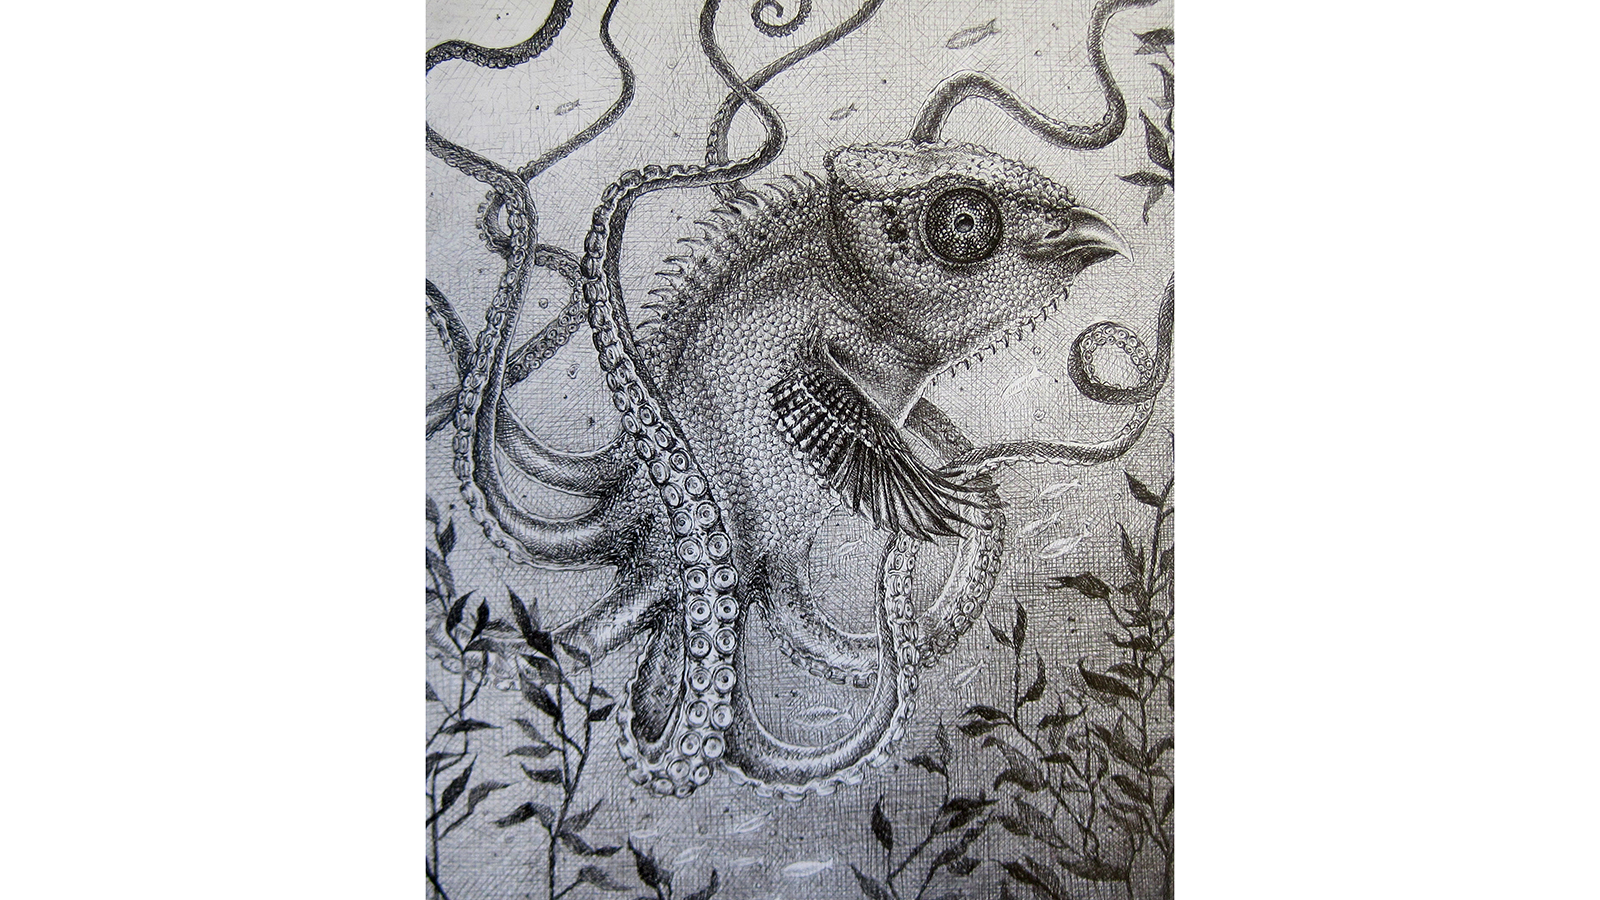 An illustration of a fish-octopus hybrid